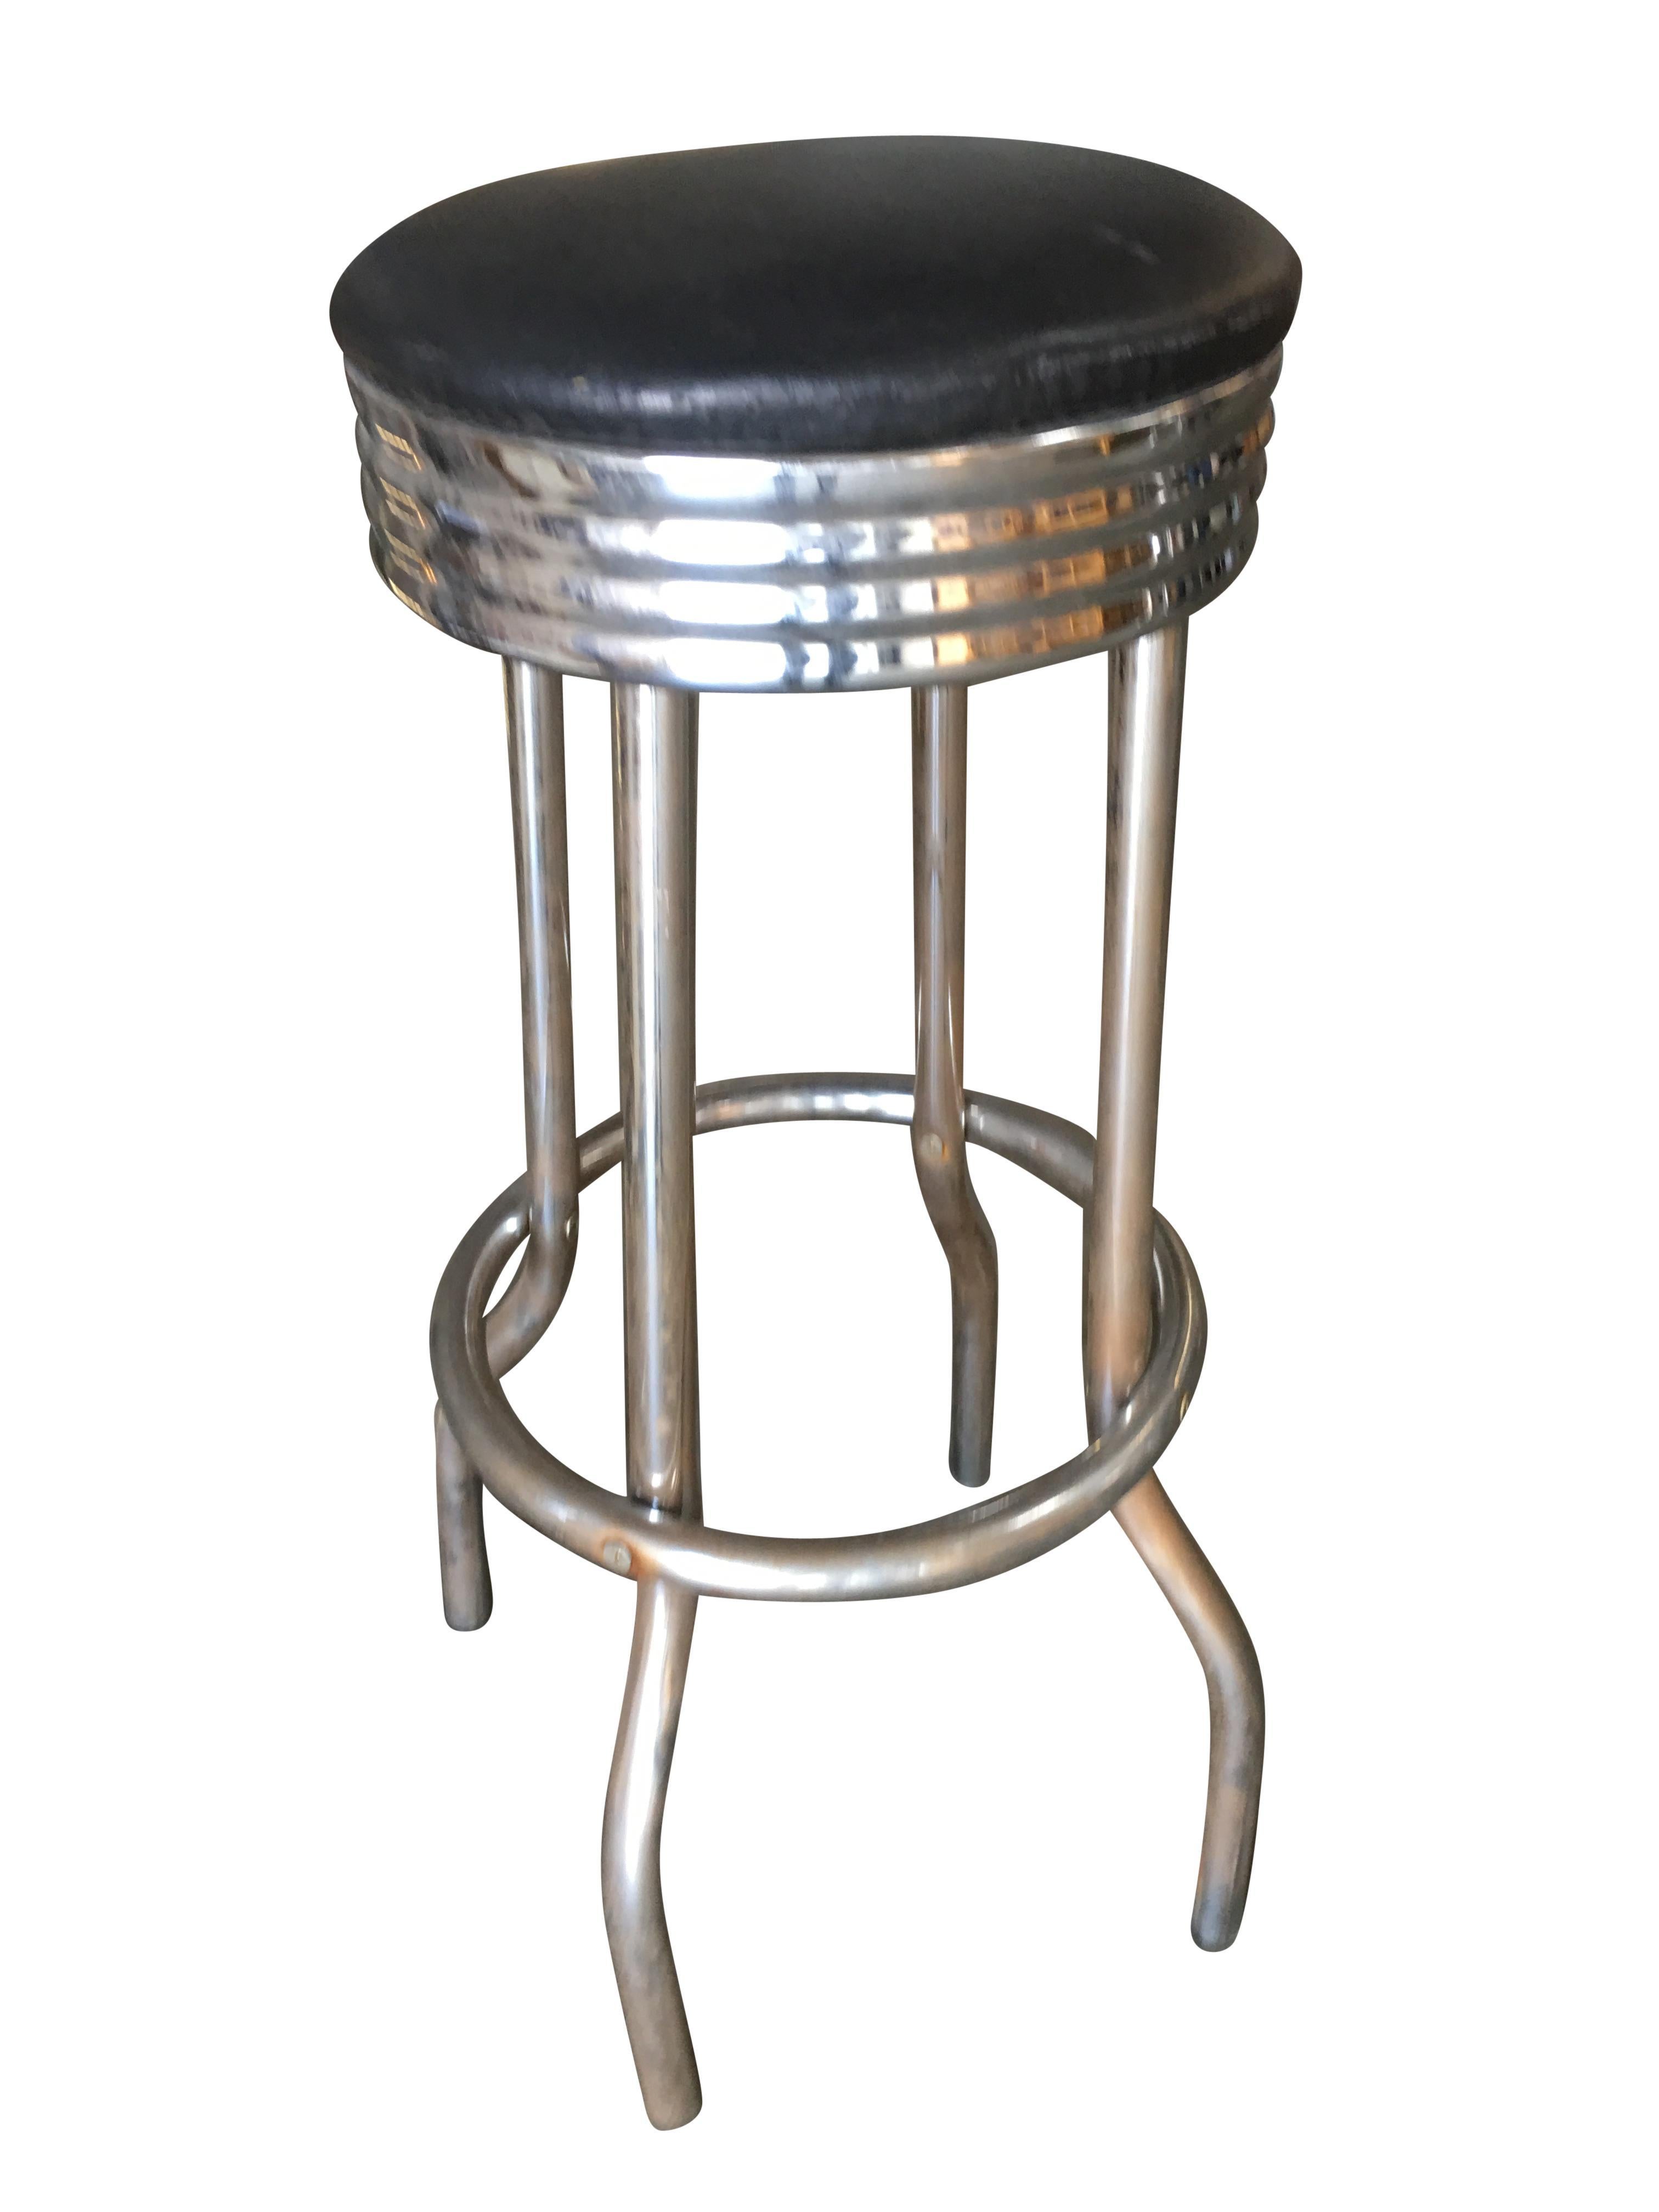 Original Mid Century 1950's Chrome Diner Bar Stool featuring an all chromed steel design with a black vinyl seat. The stools have a nice rustic patina to them with some signs of wear, use, and very minor surface rust. A great look for your newly